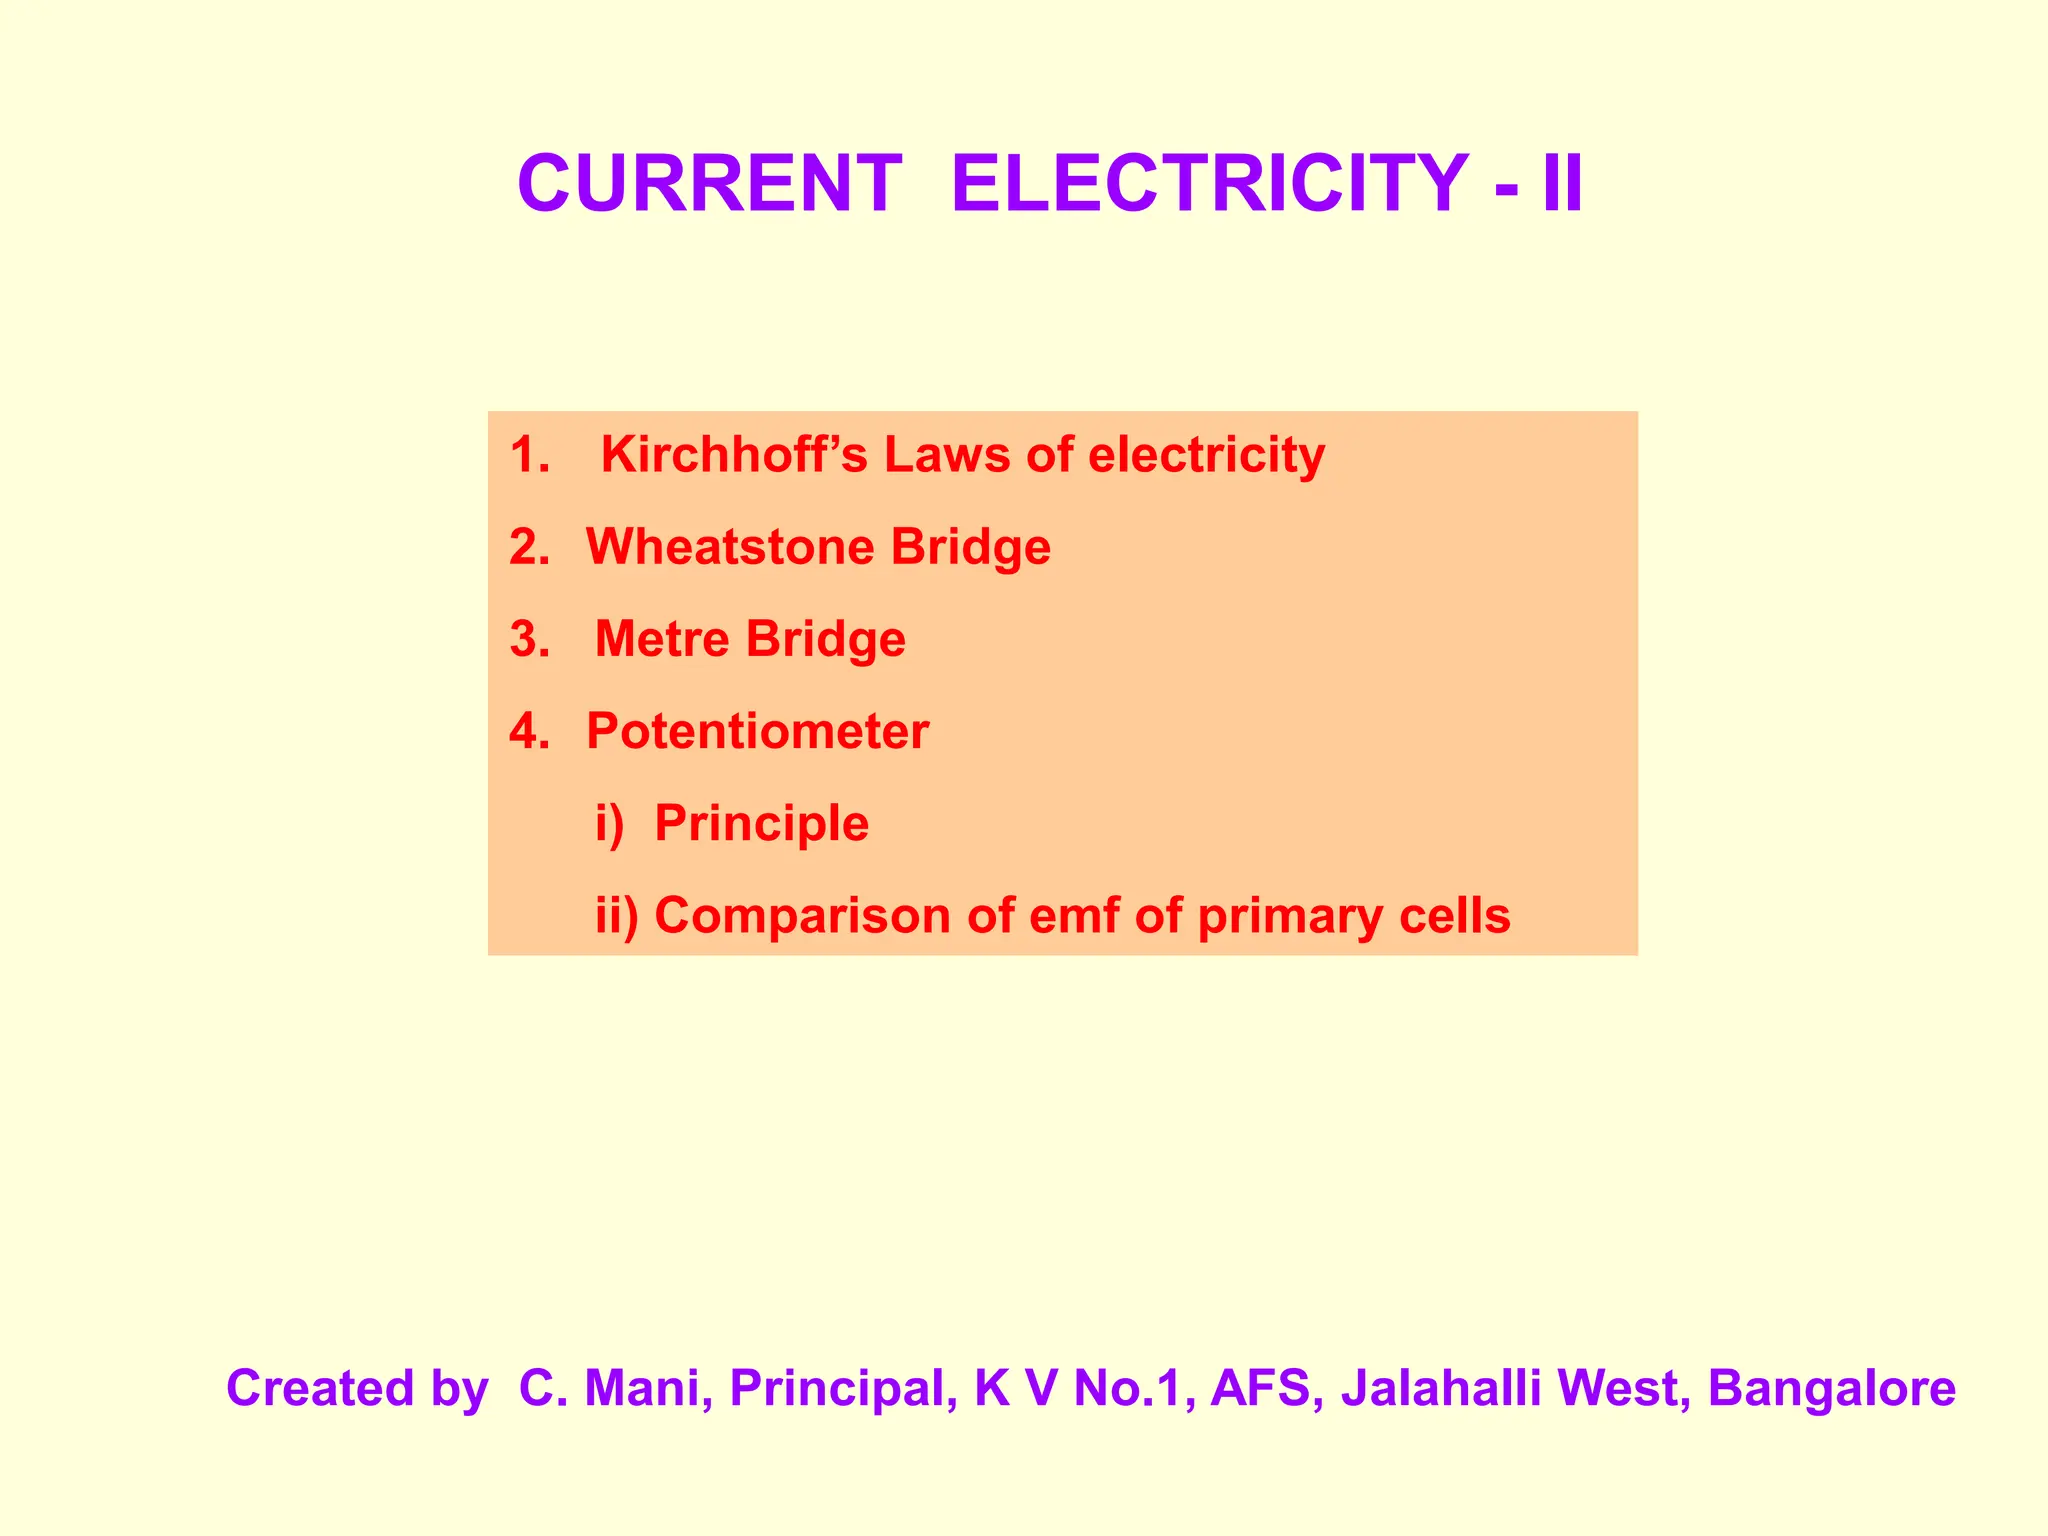 2_current_electricity_2.pptADOFBAKJBFFFF | PPT